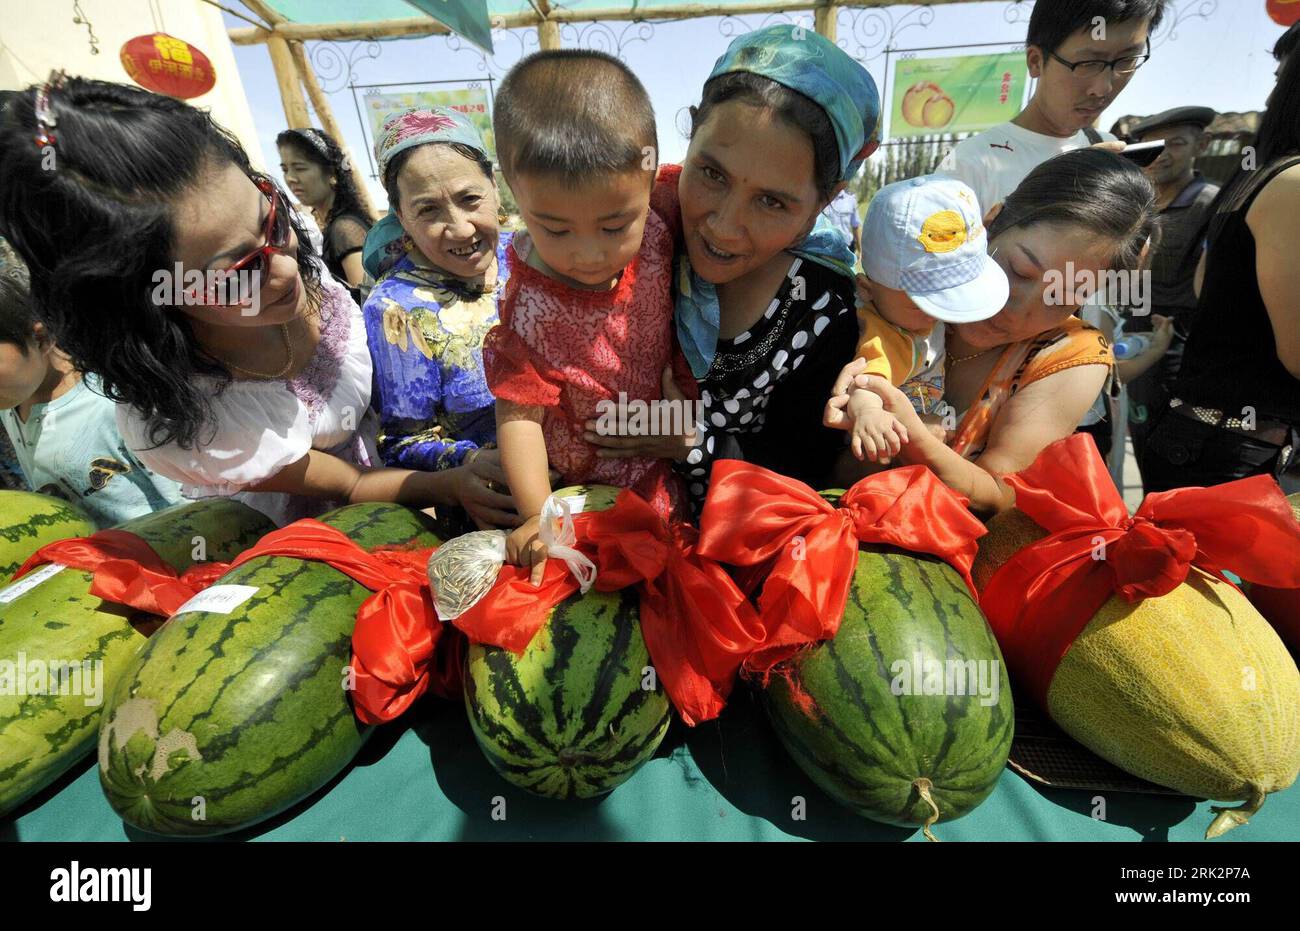 Bildnummer: 53231590  Datum: 29.07.2009  Copyright: imago/Xinhua (090729) -- HAMI(XINJIANG), July 29, 2009 (Xinhua) -- A Uygur woman carrying her child looks at some water melons in a melon contest held in Hami City, northwest China s Xinjiang Uygur Autonomous Region, July 29, 2009. Farmers from all over the city brought their harvests of hami melons, water melons and musk melons to attend the 6th melon contest in Hami on Wednesday, which attracted a great deal of visitors from home and abroad.     (Xinhua/Shen Qiao) (lyi) (2)CHINA-HAMI-MELON-CONTEST (CN)  PUBLICATIONxNOTxINxCHN  Melonen Wettb Stock Photo